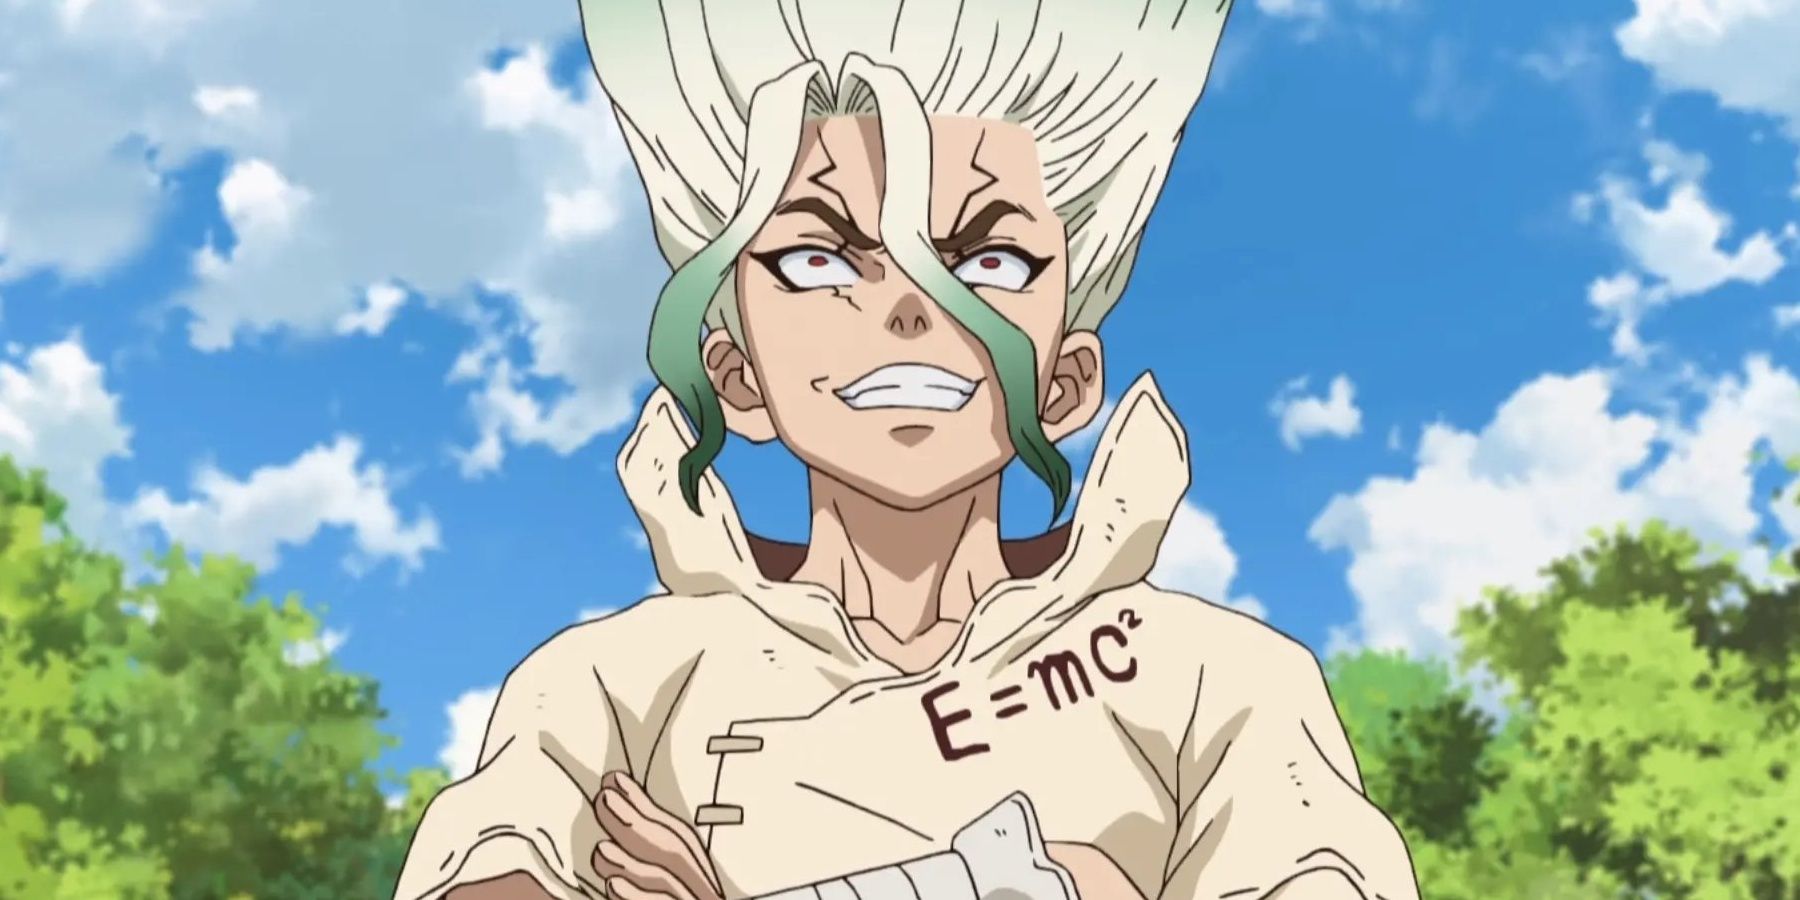 Dr Stone  05  Lost in Anime  Anime Dr stone Anime friendship